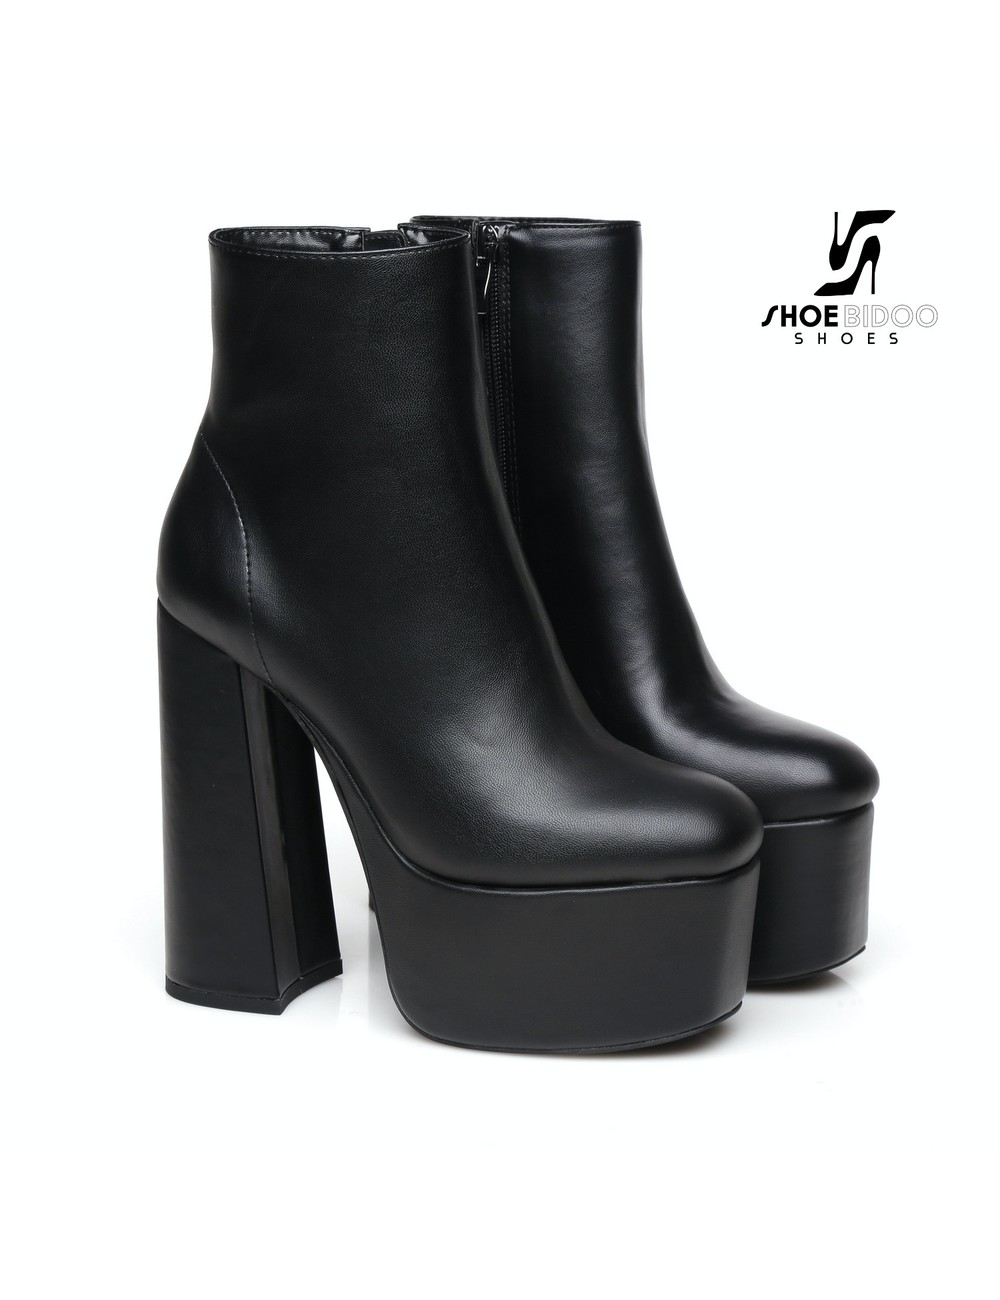 Ellie Tailor by Giaro Black chunky heel "Antonia" ankle boots by Ellie